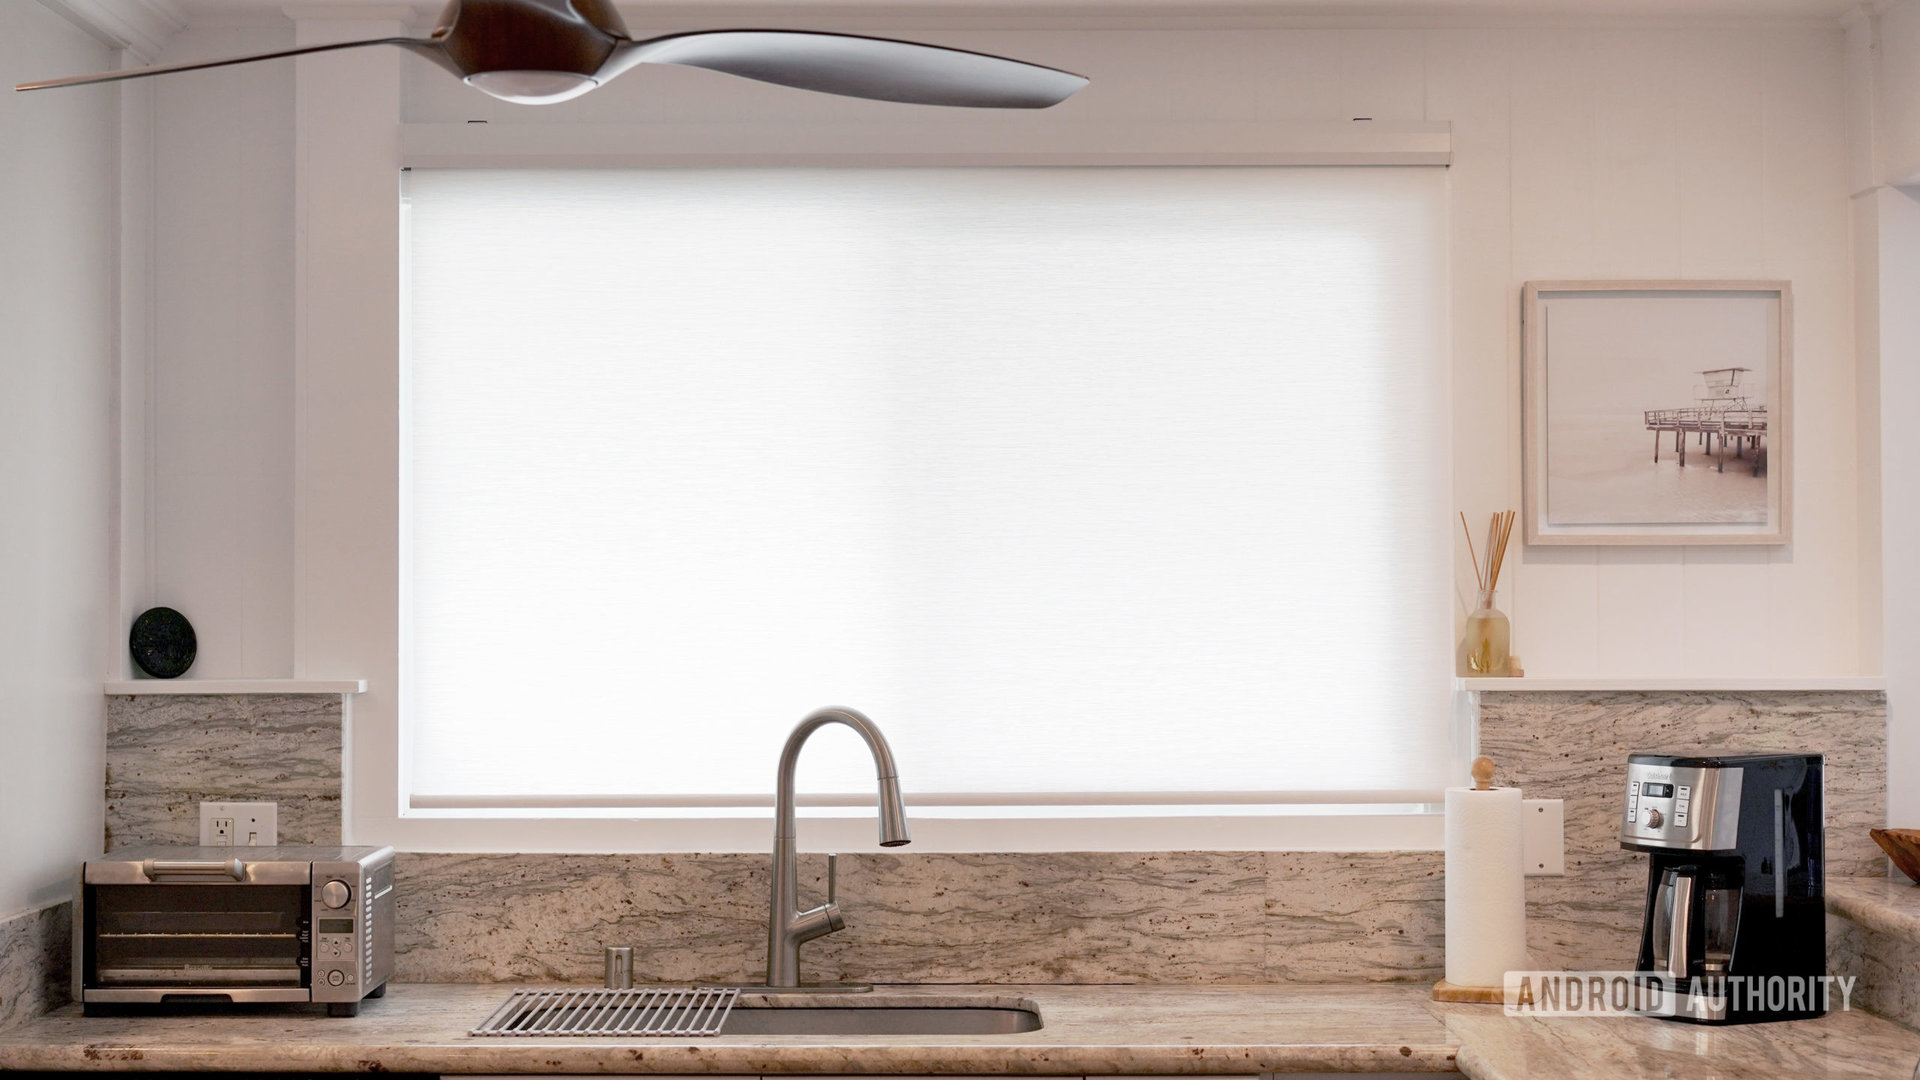 A partial sheer smart blind lets sunlight into a kitchen while allowing for privacy.